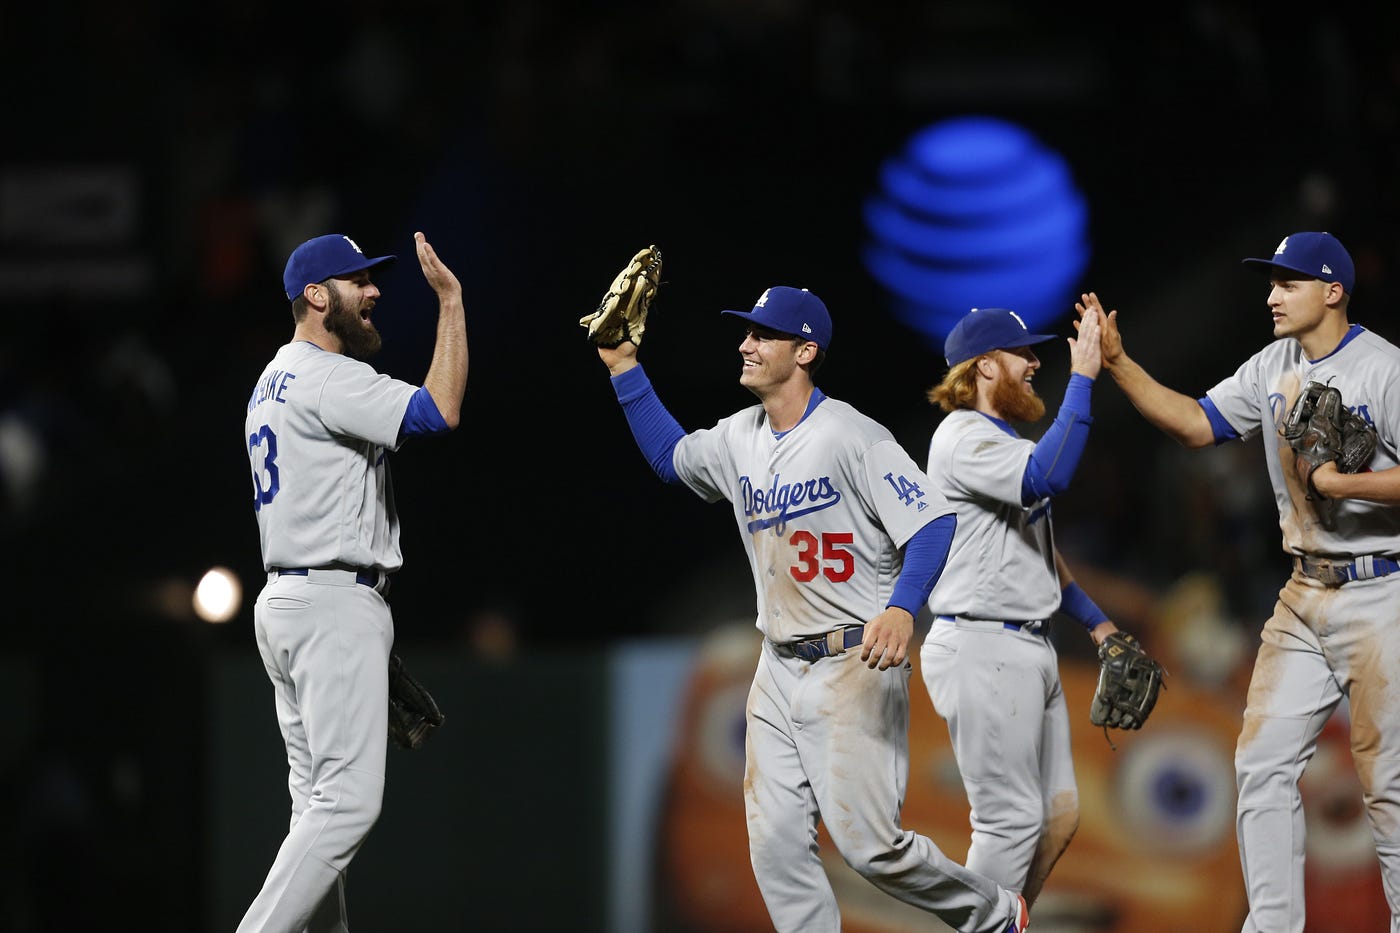 Former Dodgers OF Cody Bellinger Could Win Major Award This Season